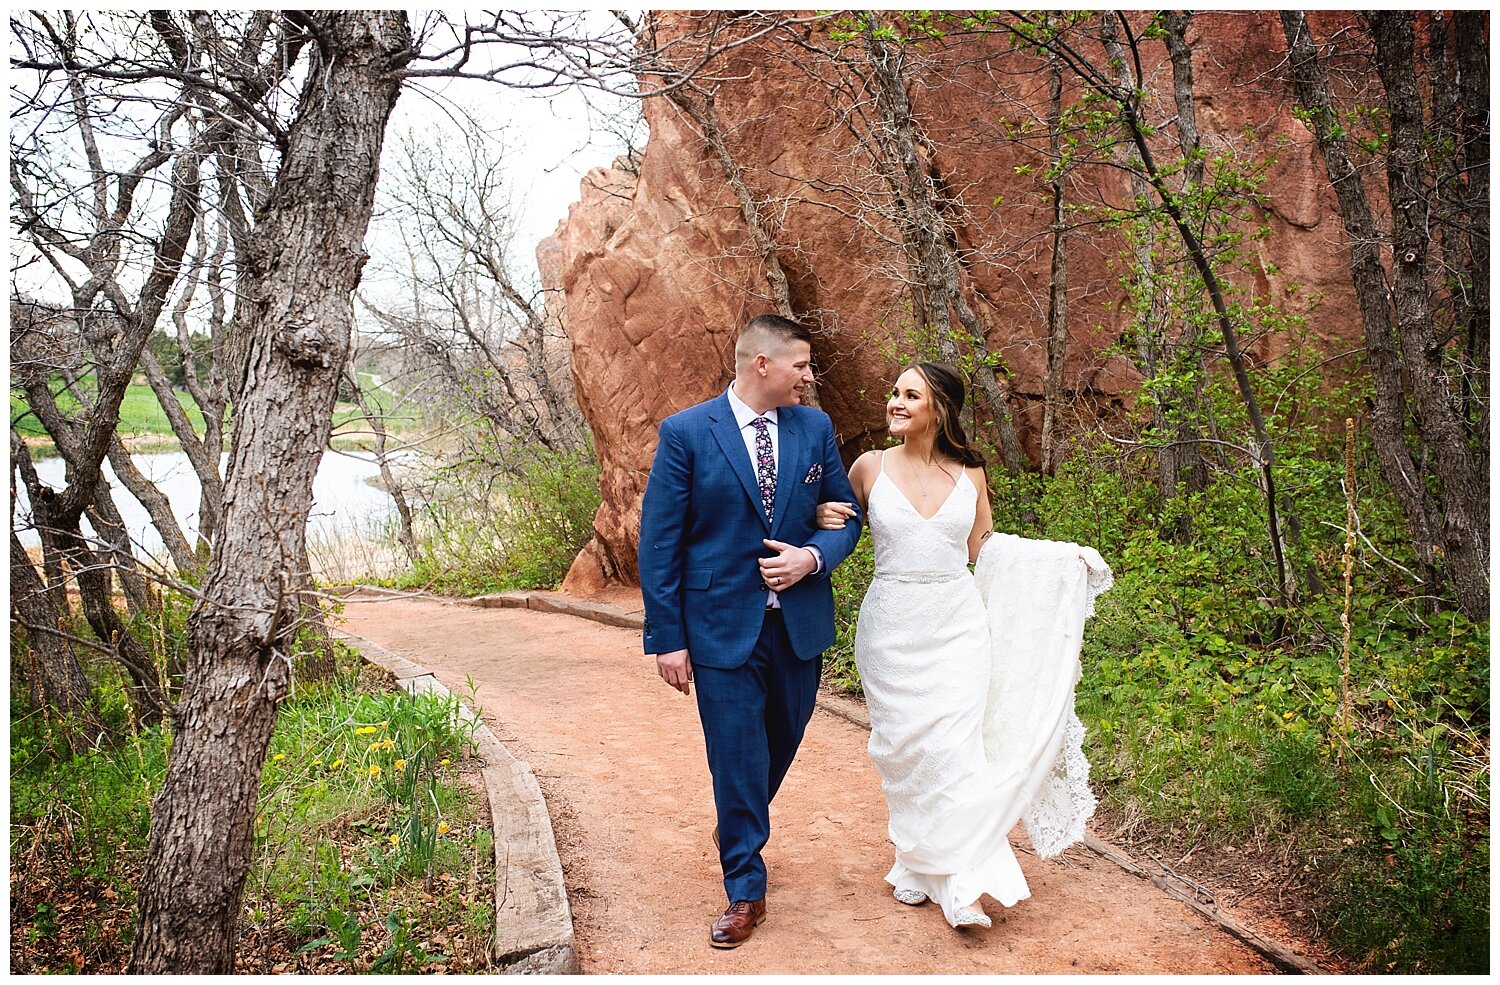 Molly and Nick's Wedding Day|Arrowhead Golf Course Elopement_0079.jpg